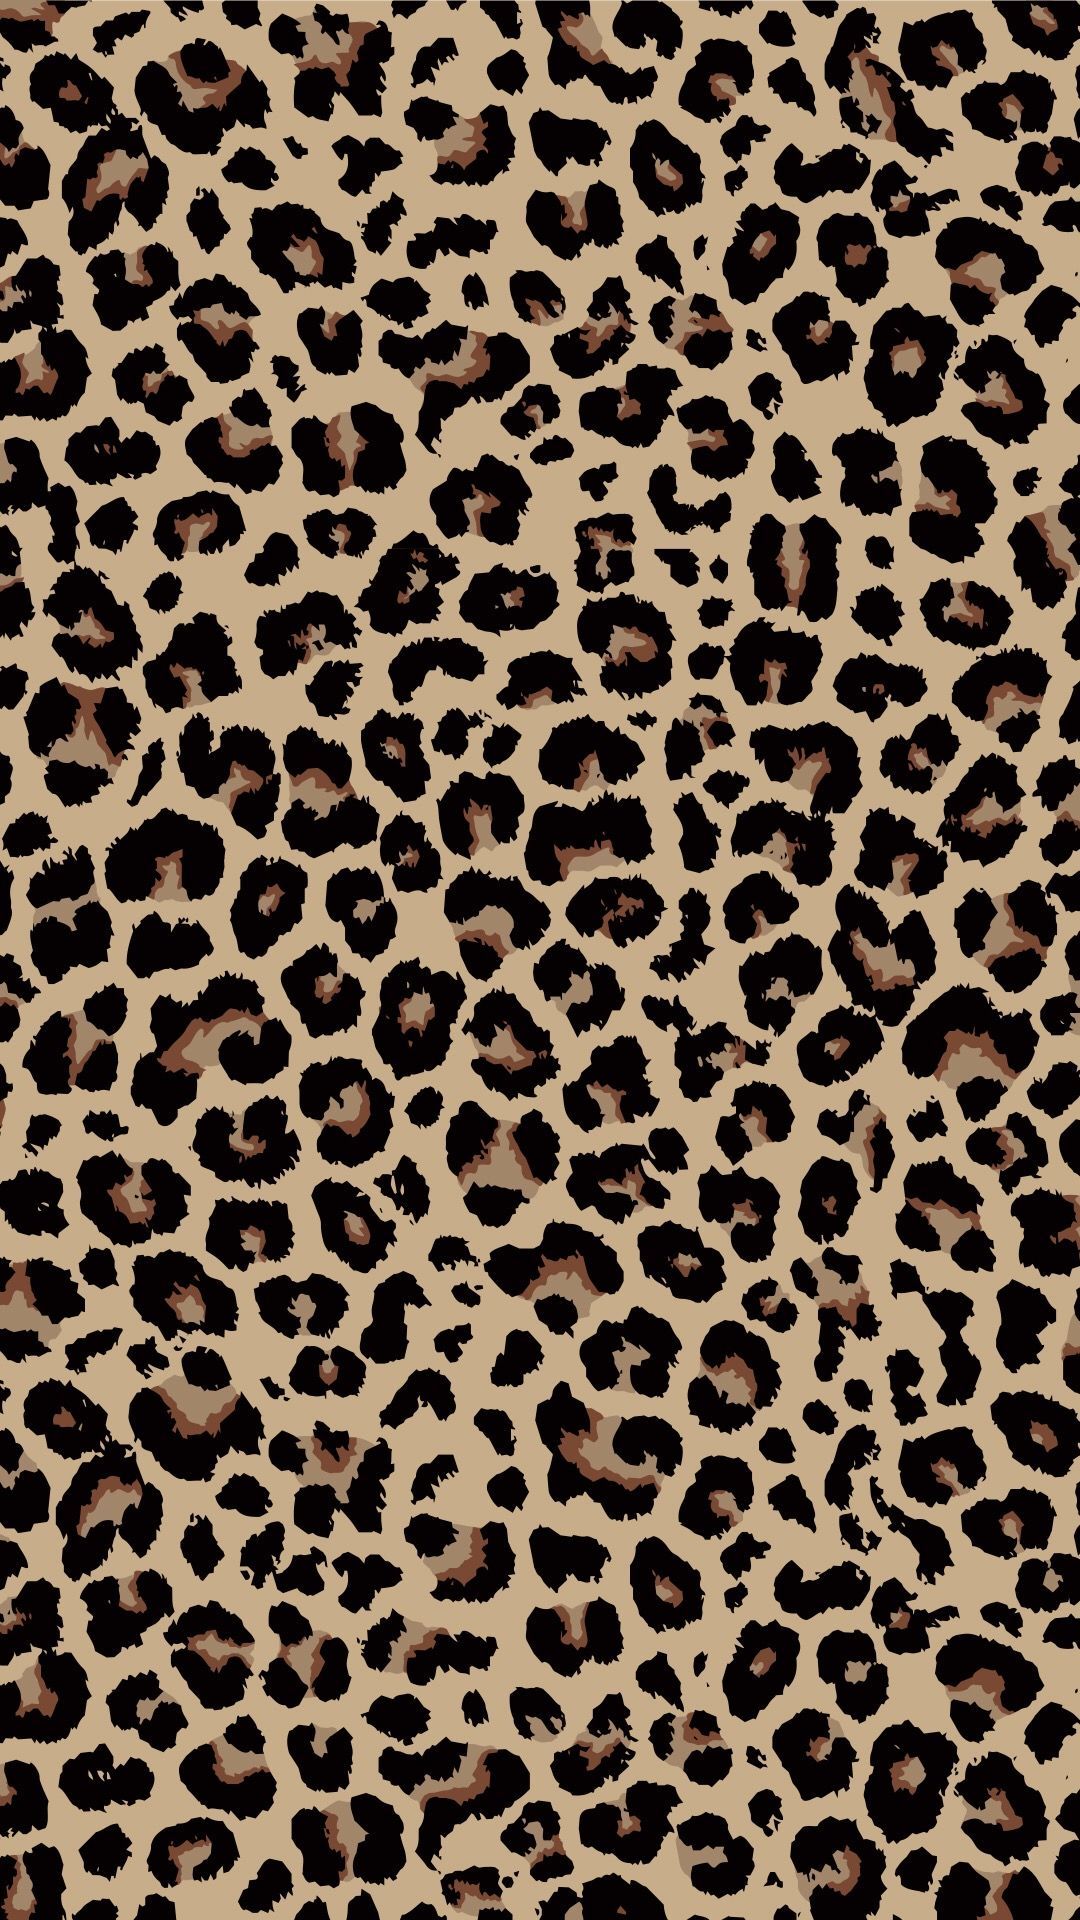 Leopard Print Iphone Wallpapers